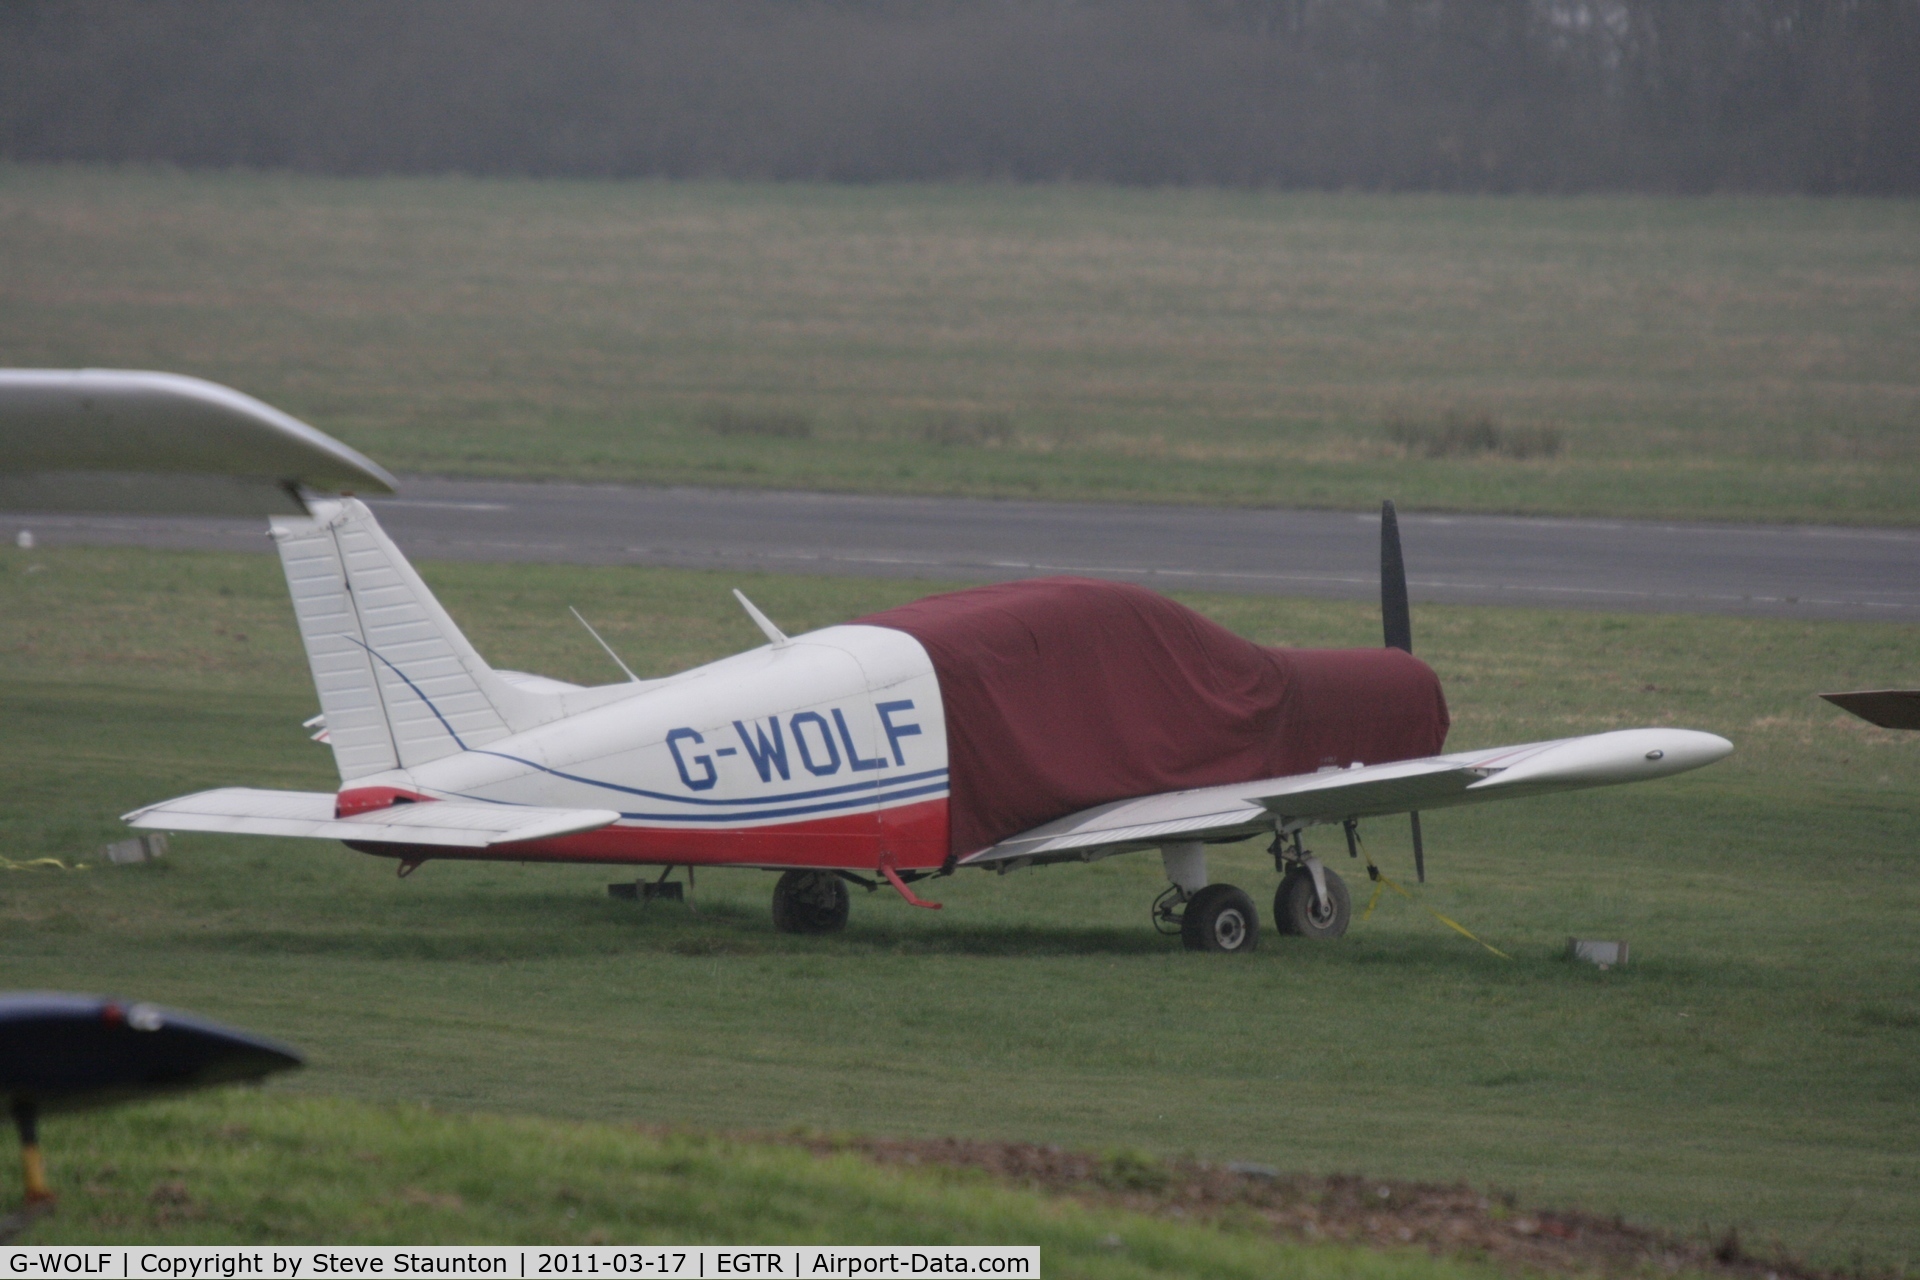 G-WOLF, 1974 Piper PA-28-140 Cherokee Cruiser C/N 28-7425439, Taken at Elstree Airfield March 2011